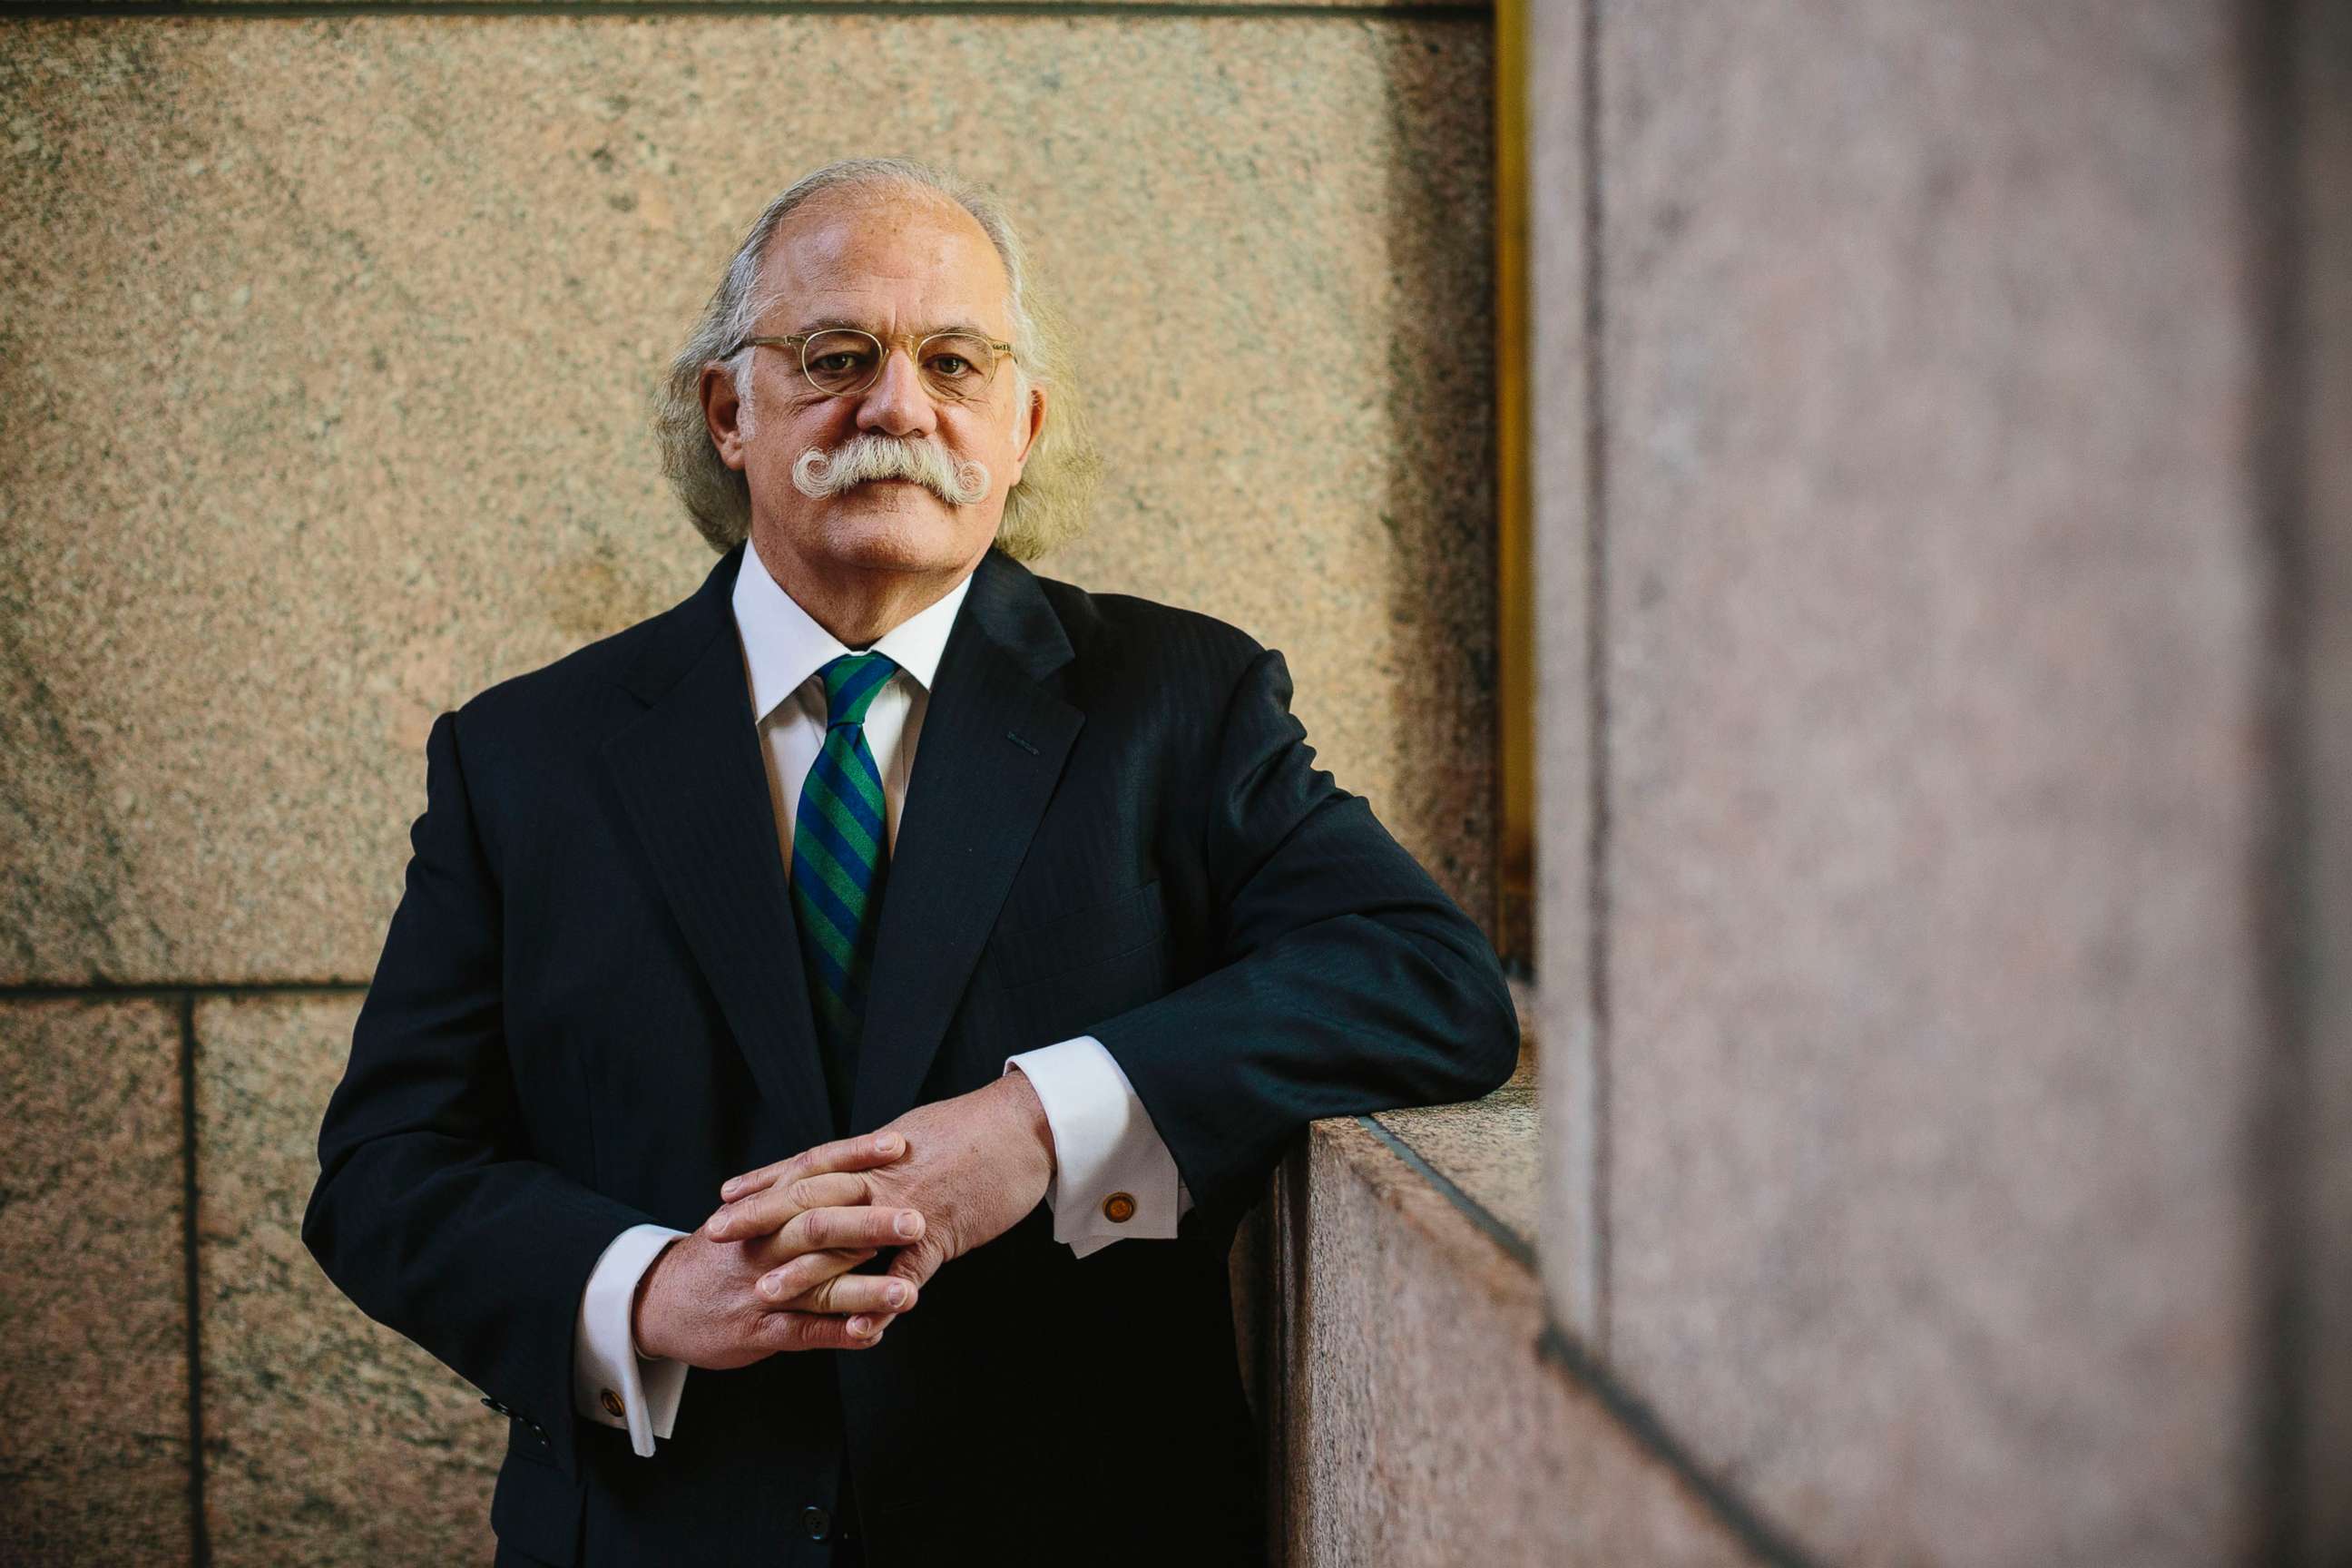 PHOTO: Ty Cobb in Washington, D.C., Jan. 21, 2016. Cobb joined Trump administration's legal team in July 2017.